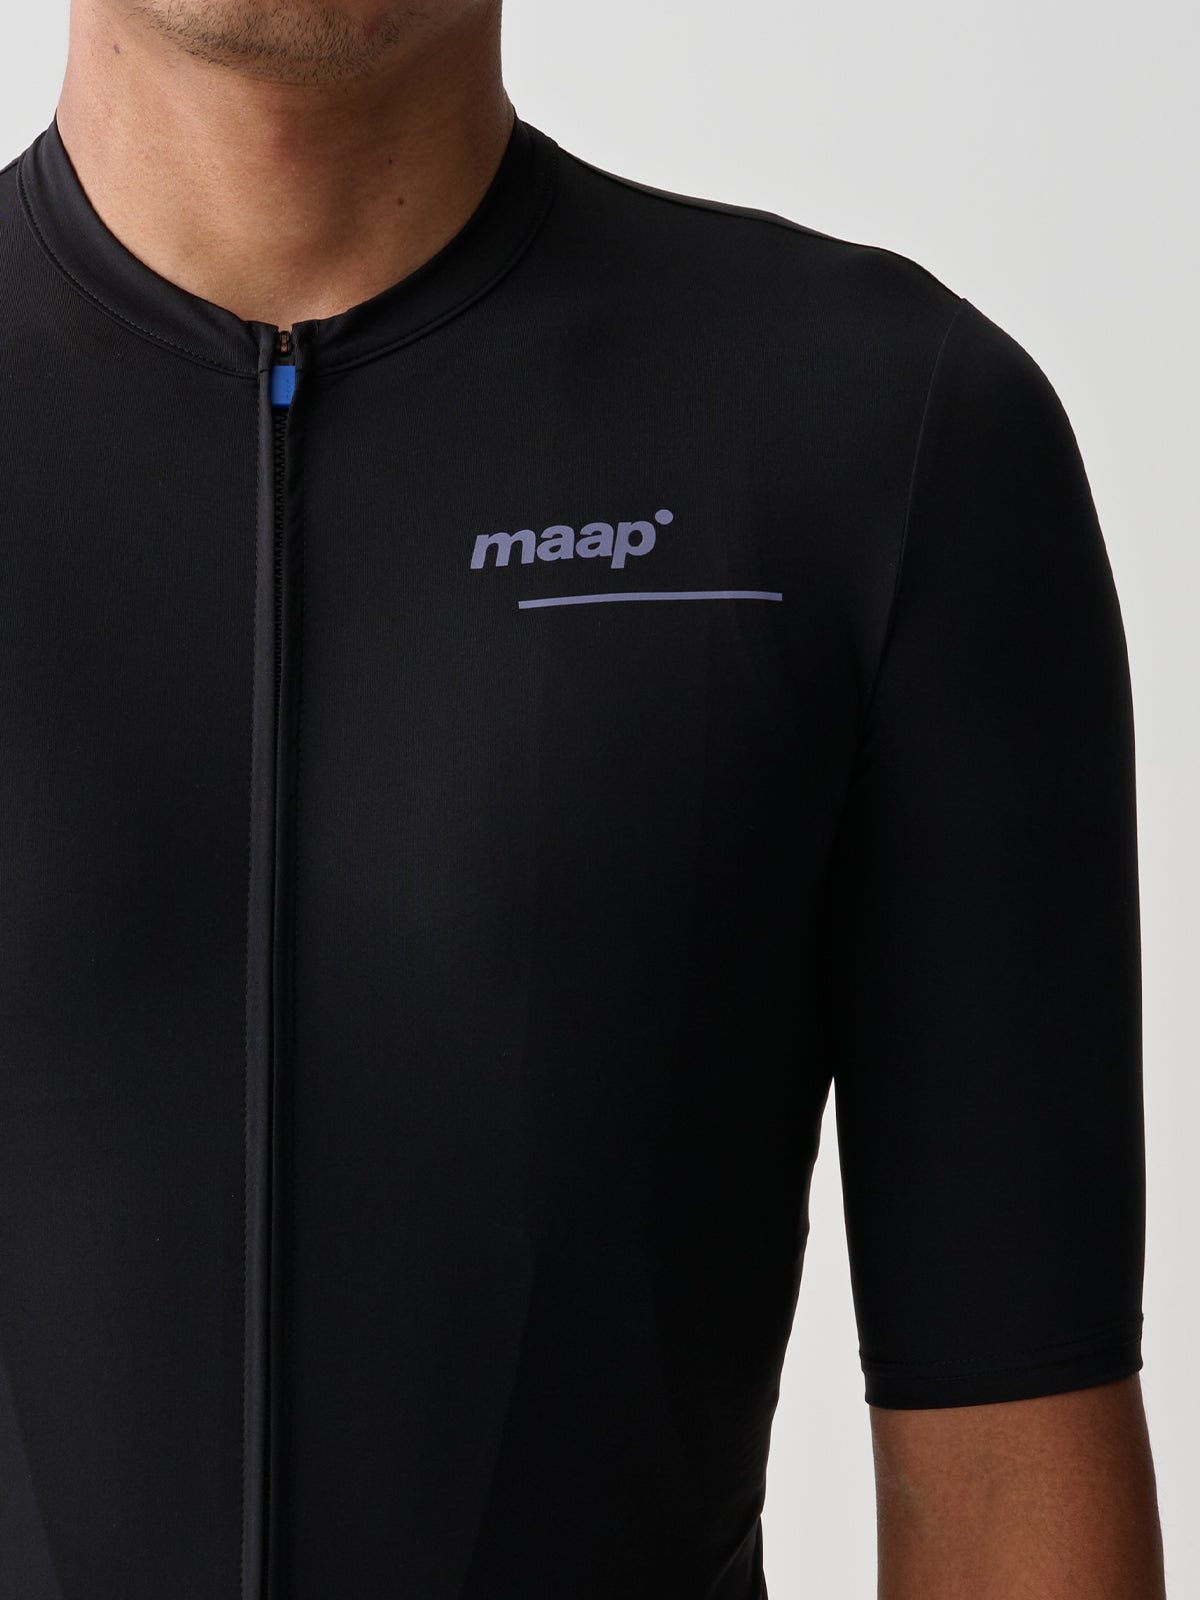 MAAP Training Jersey Review